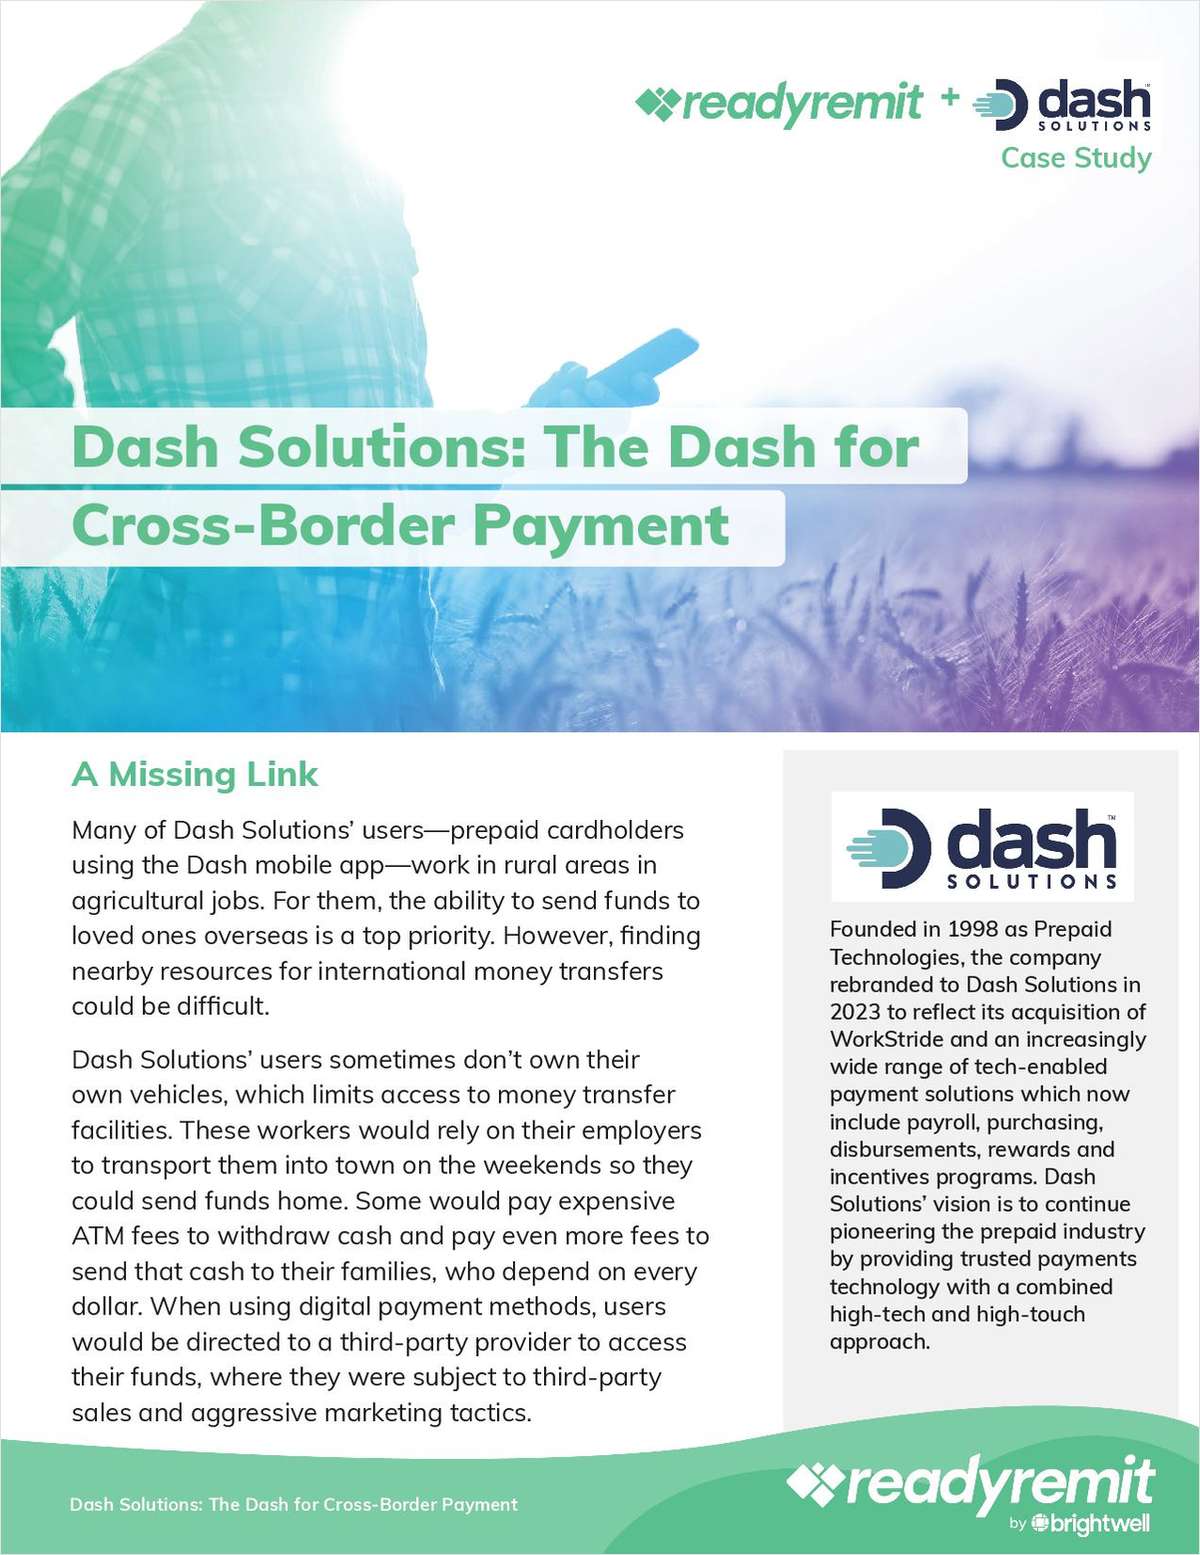 Dash Solutions: The Dash for Cross-Border Payment